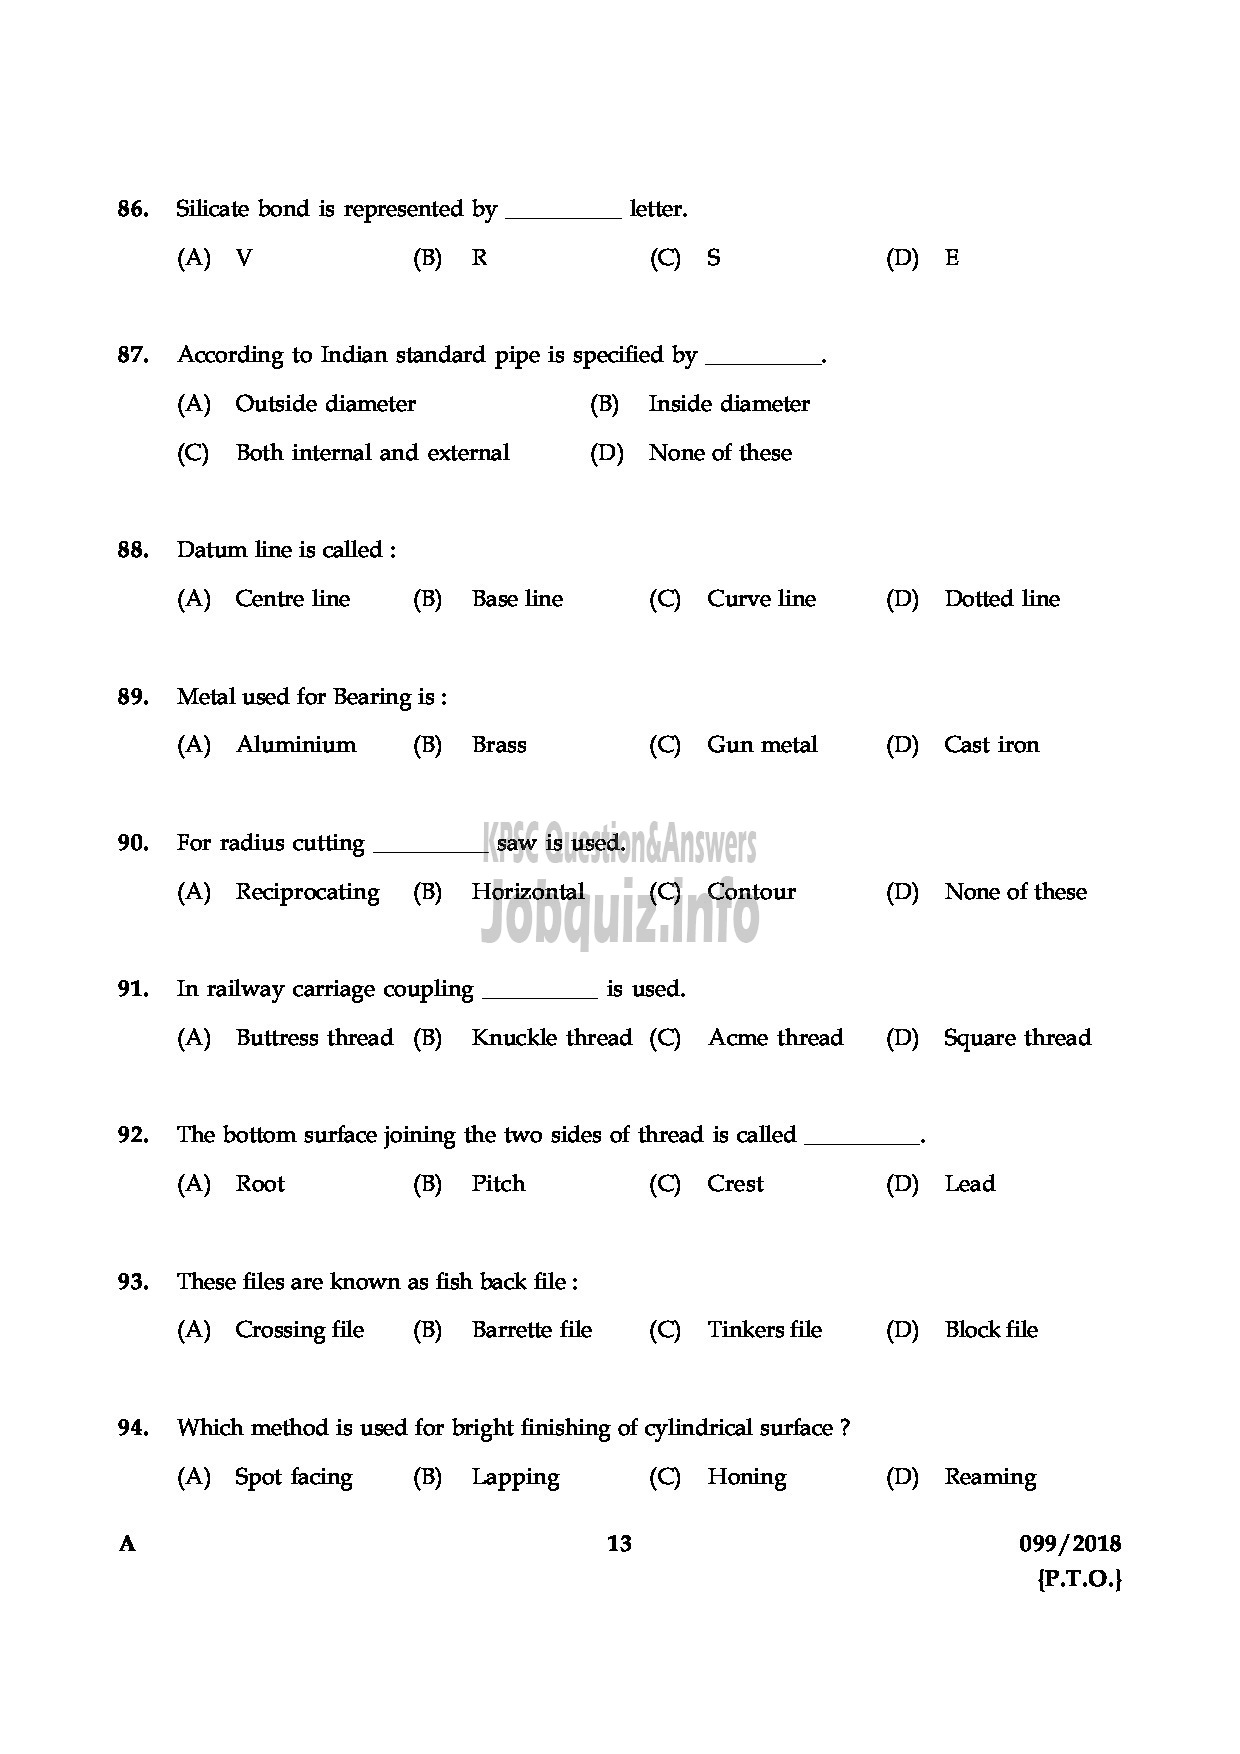 Kerala PSC Question Paper - JUNIOR INSTRUCTOR FITTER INDUSTRIAL TRAINING ENGLISH -13